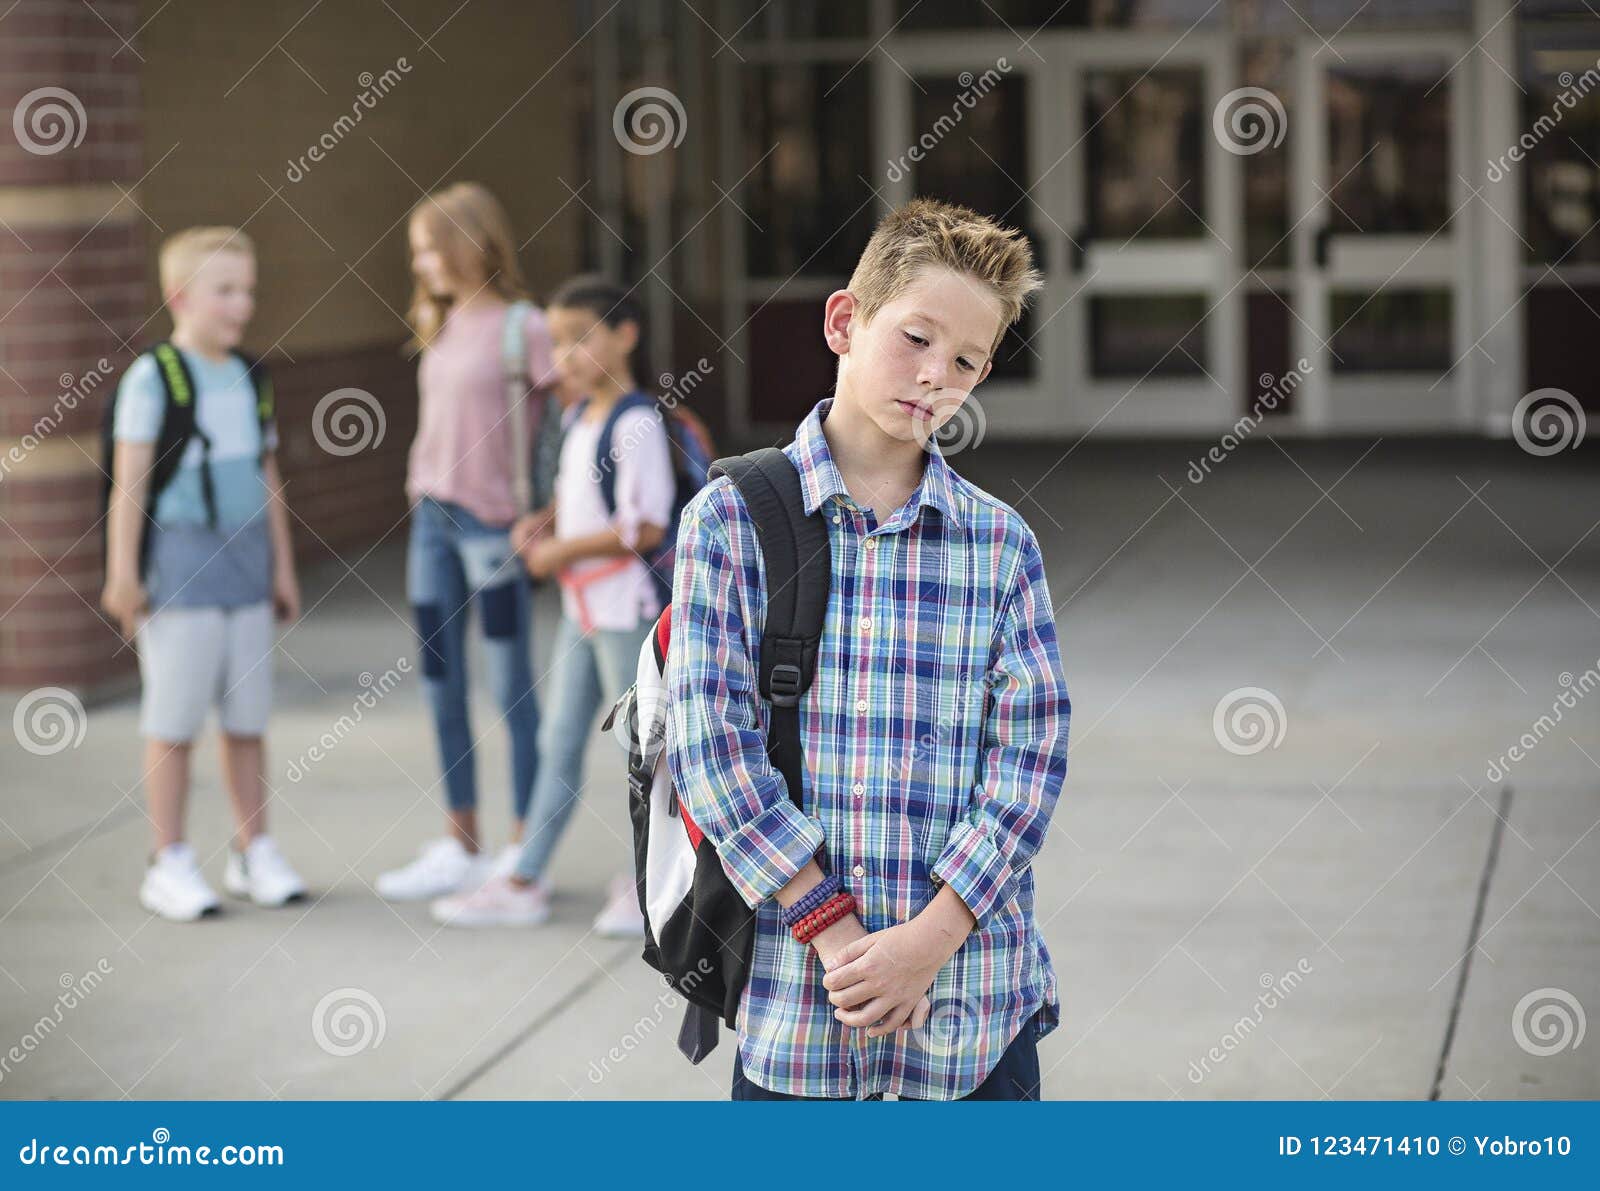 Sad Boy Feeling Left Out, Teased and Bullied by His Classmates ...